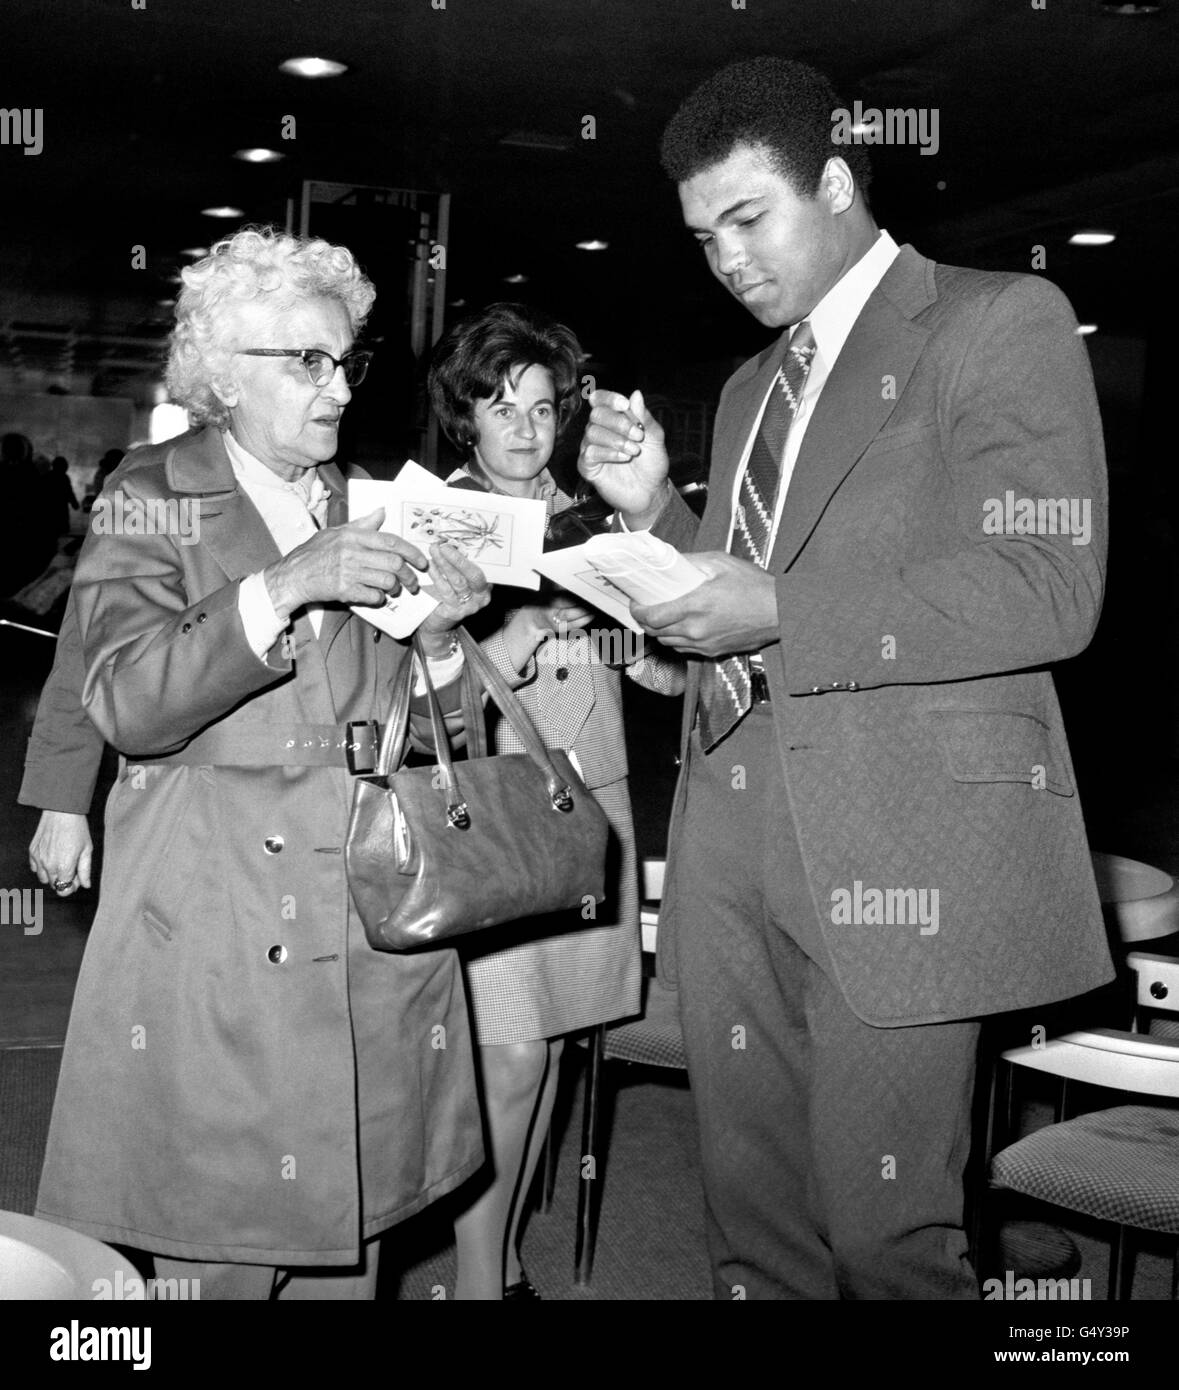 American boxer, Muhammad Ali gives autographs to female fans at Heathrow Airport, before flying out to Saudi Arabia, for a Muslim pilgrimage to Mecca where he plans to celebrate Omra. Stock Photo